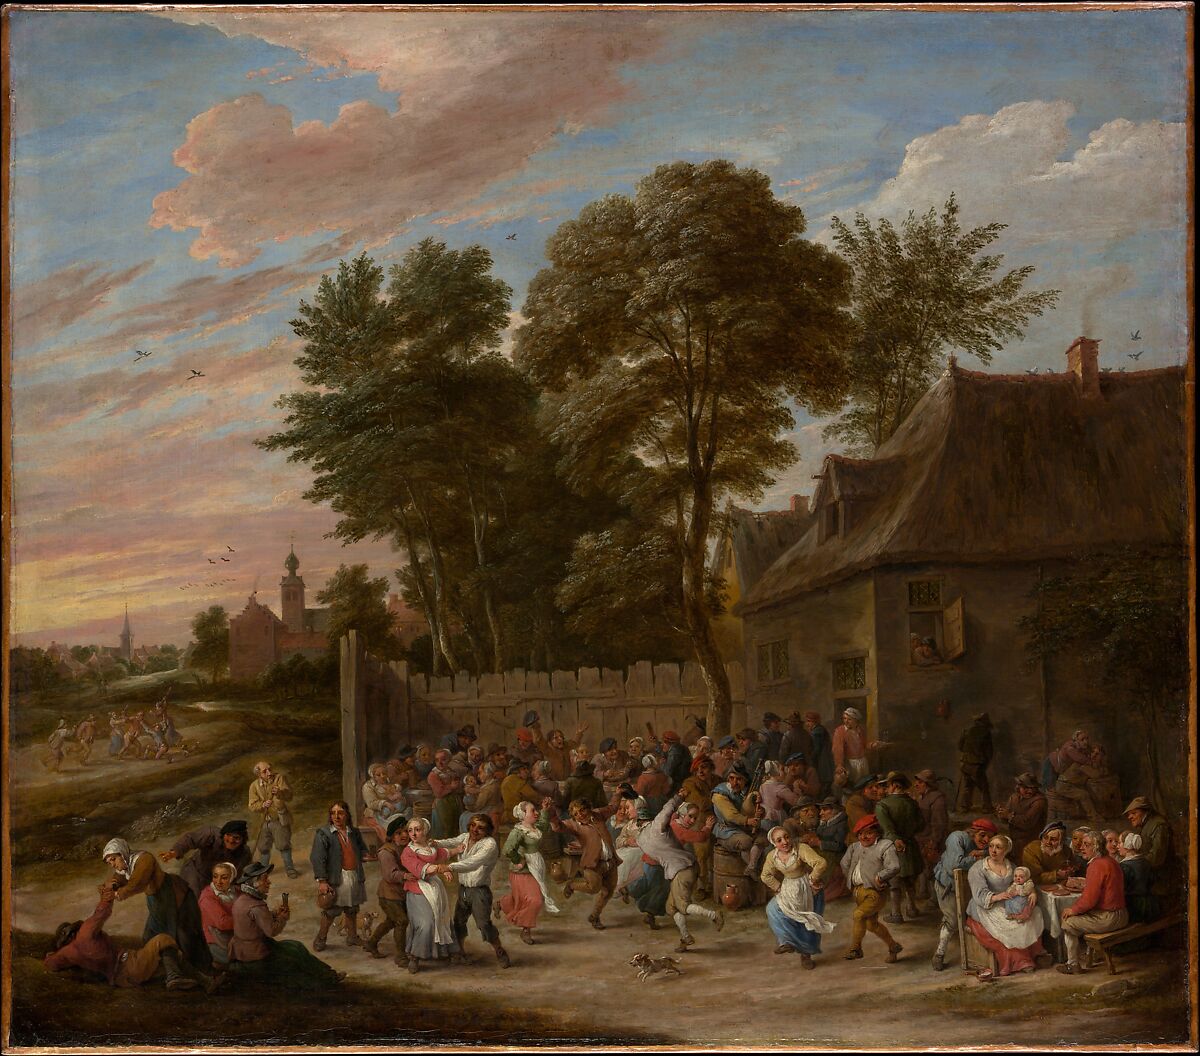 Peasants Dancing and Feasting, David Teniers the Younger  Flemish, Oil on canvas